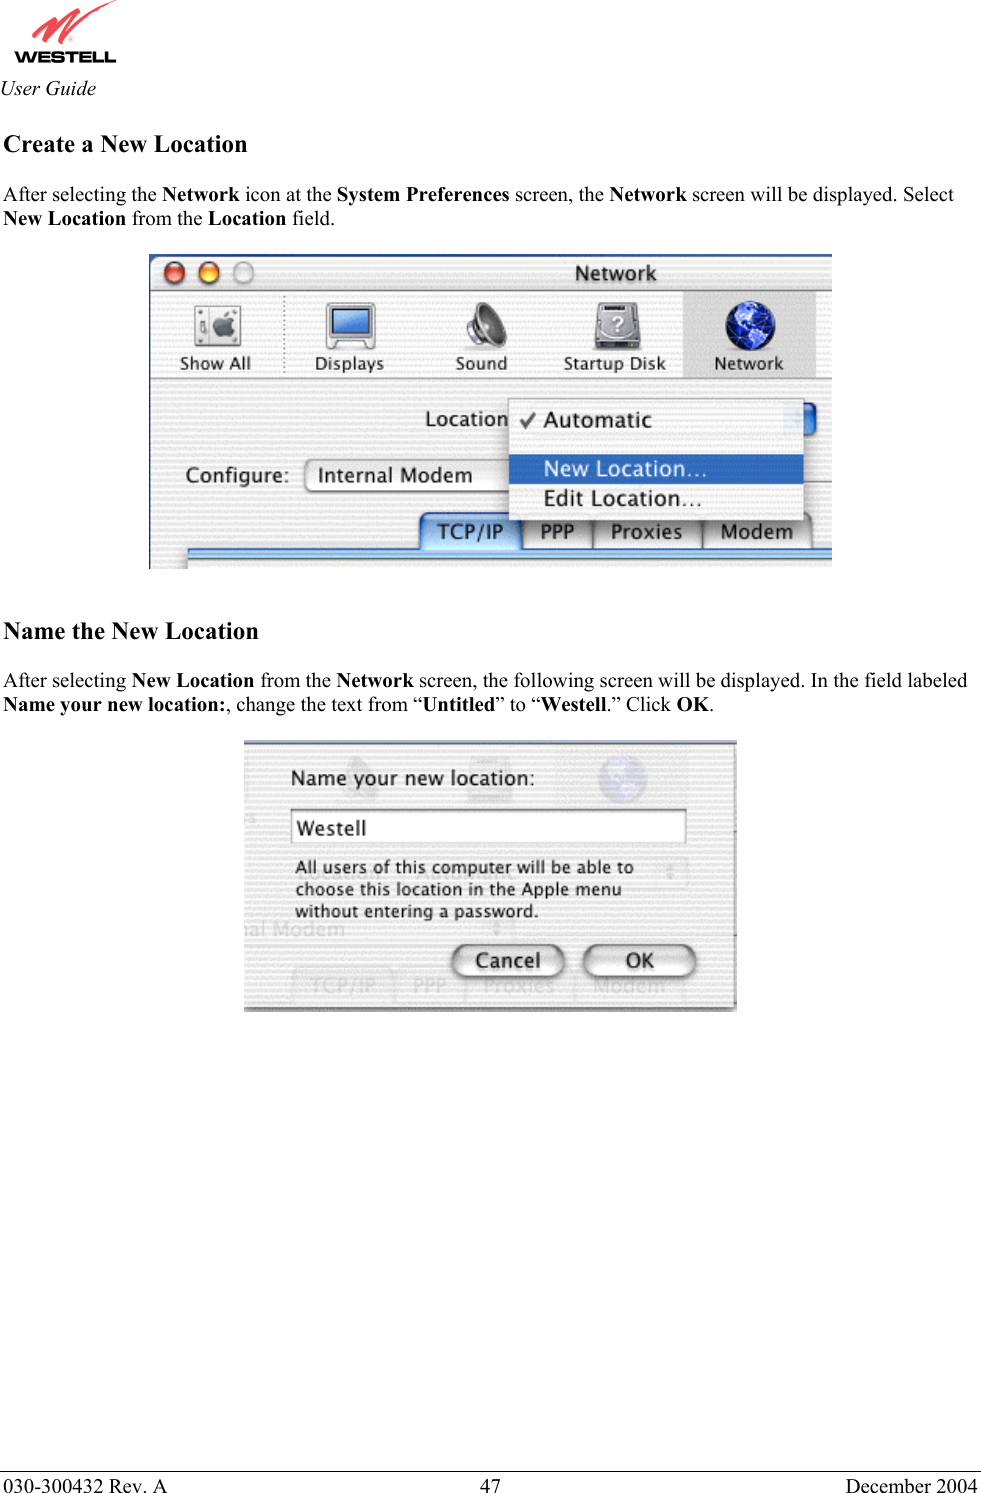       030-300432 Rev. A  47 December 2004  User Guide Create a New Location  After selecting the Network icon at the System Preferences screen, the Network screen will be displayed. Select New Location from the Location field.     Name the New Location  After selecting New Location from the Network screen, the following screen will be displayed. In the field labeled Name your new location:, change the text from “Untitled” to “Westell.” Click OK.                   